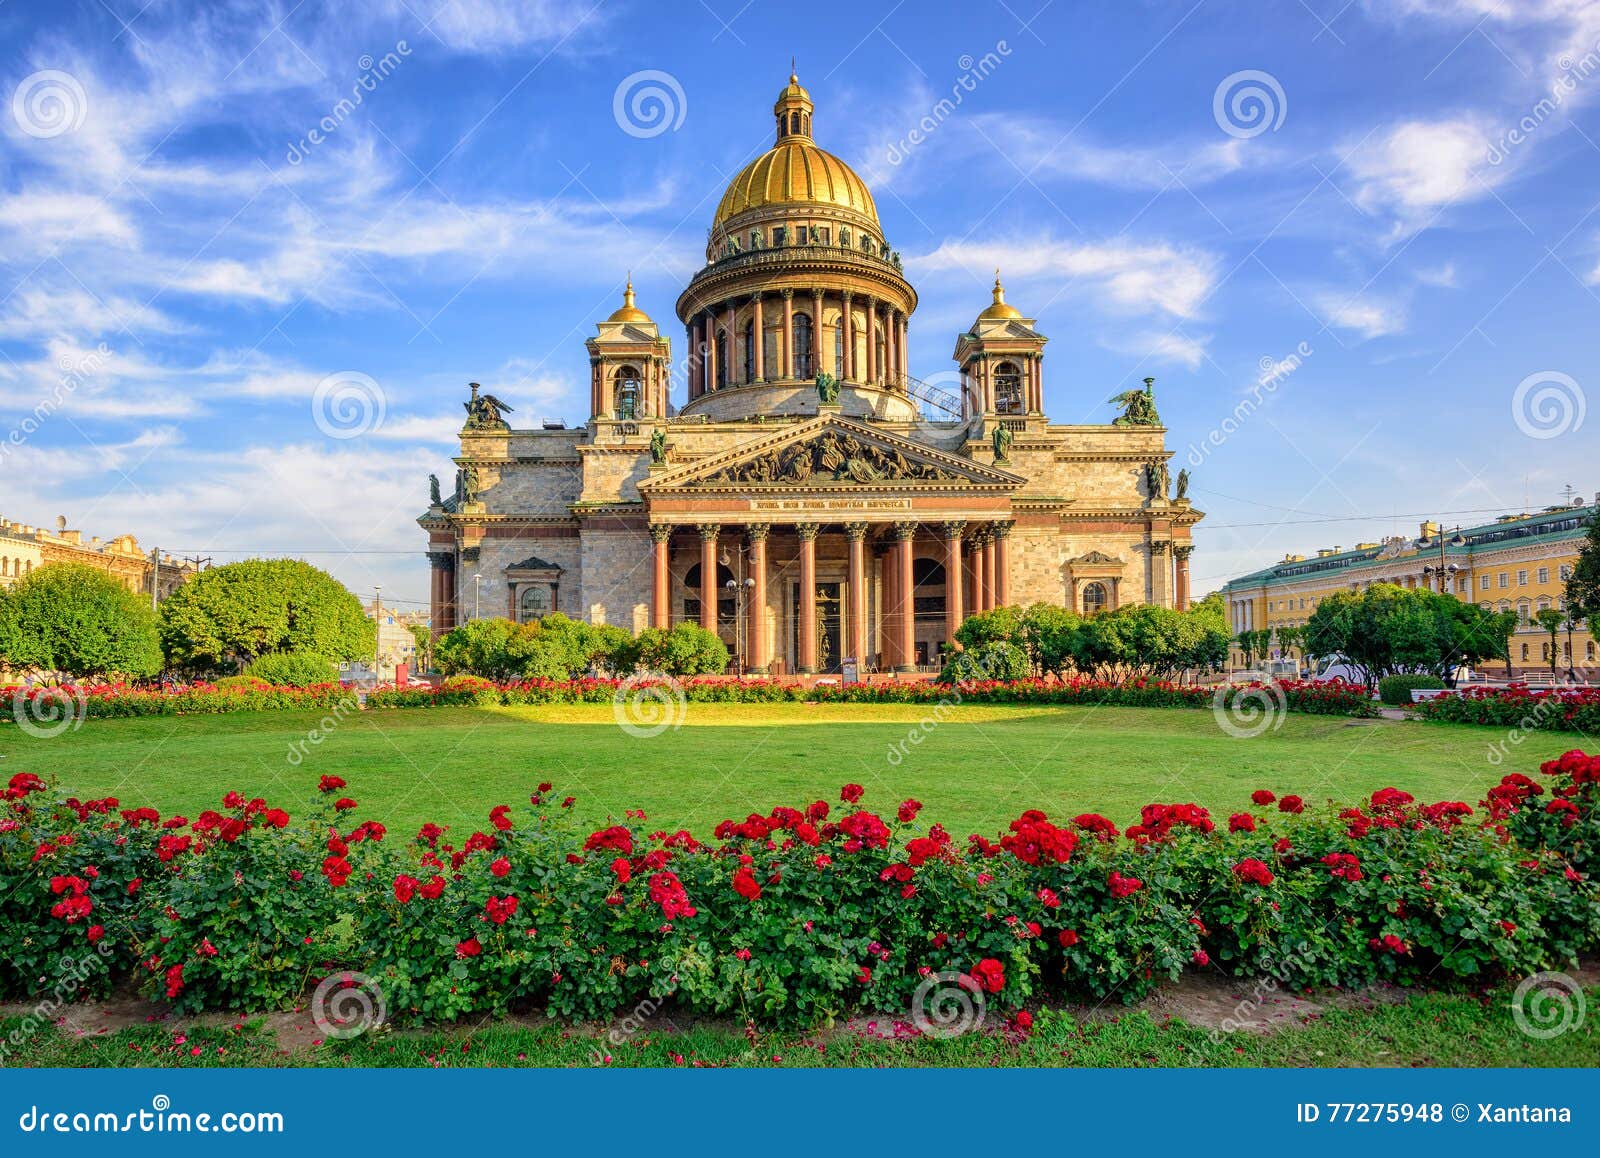 st isaac cathedral, saint petersburg, russia